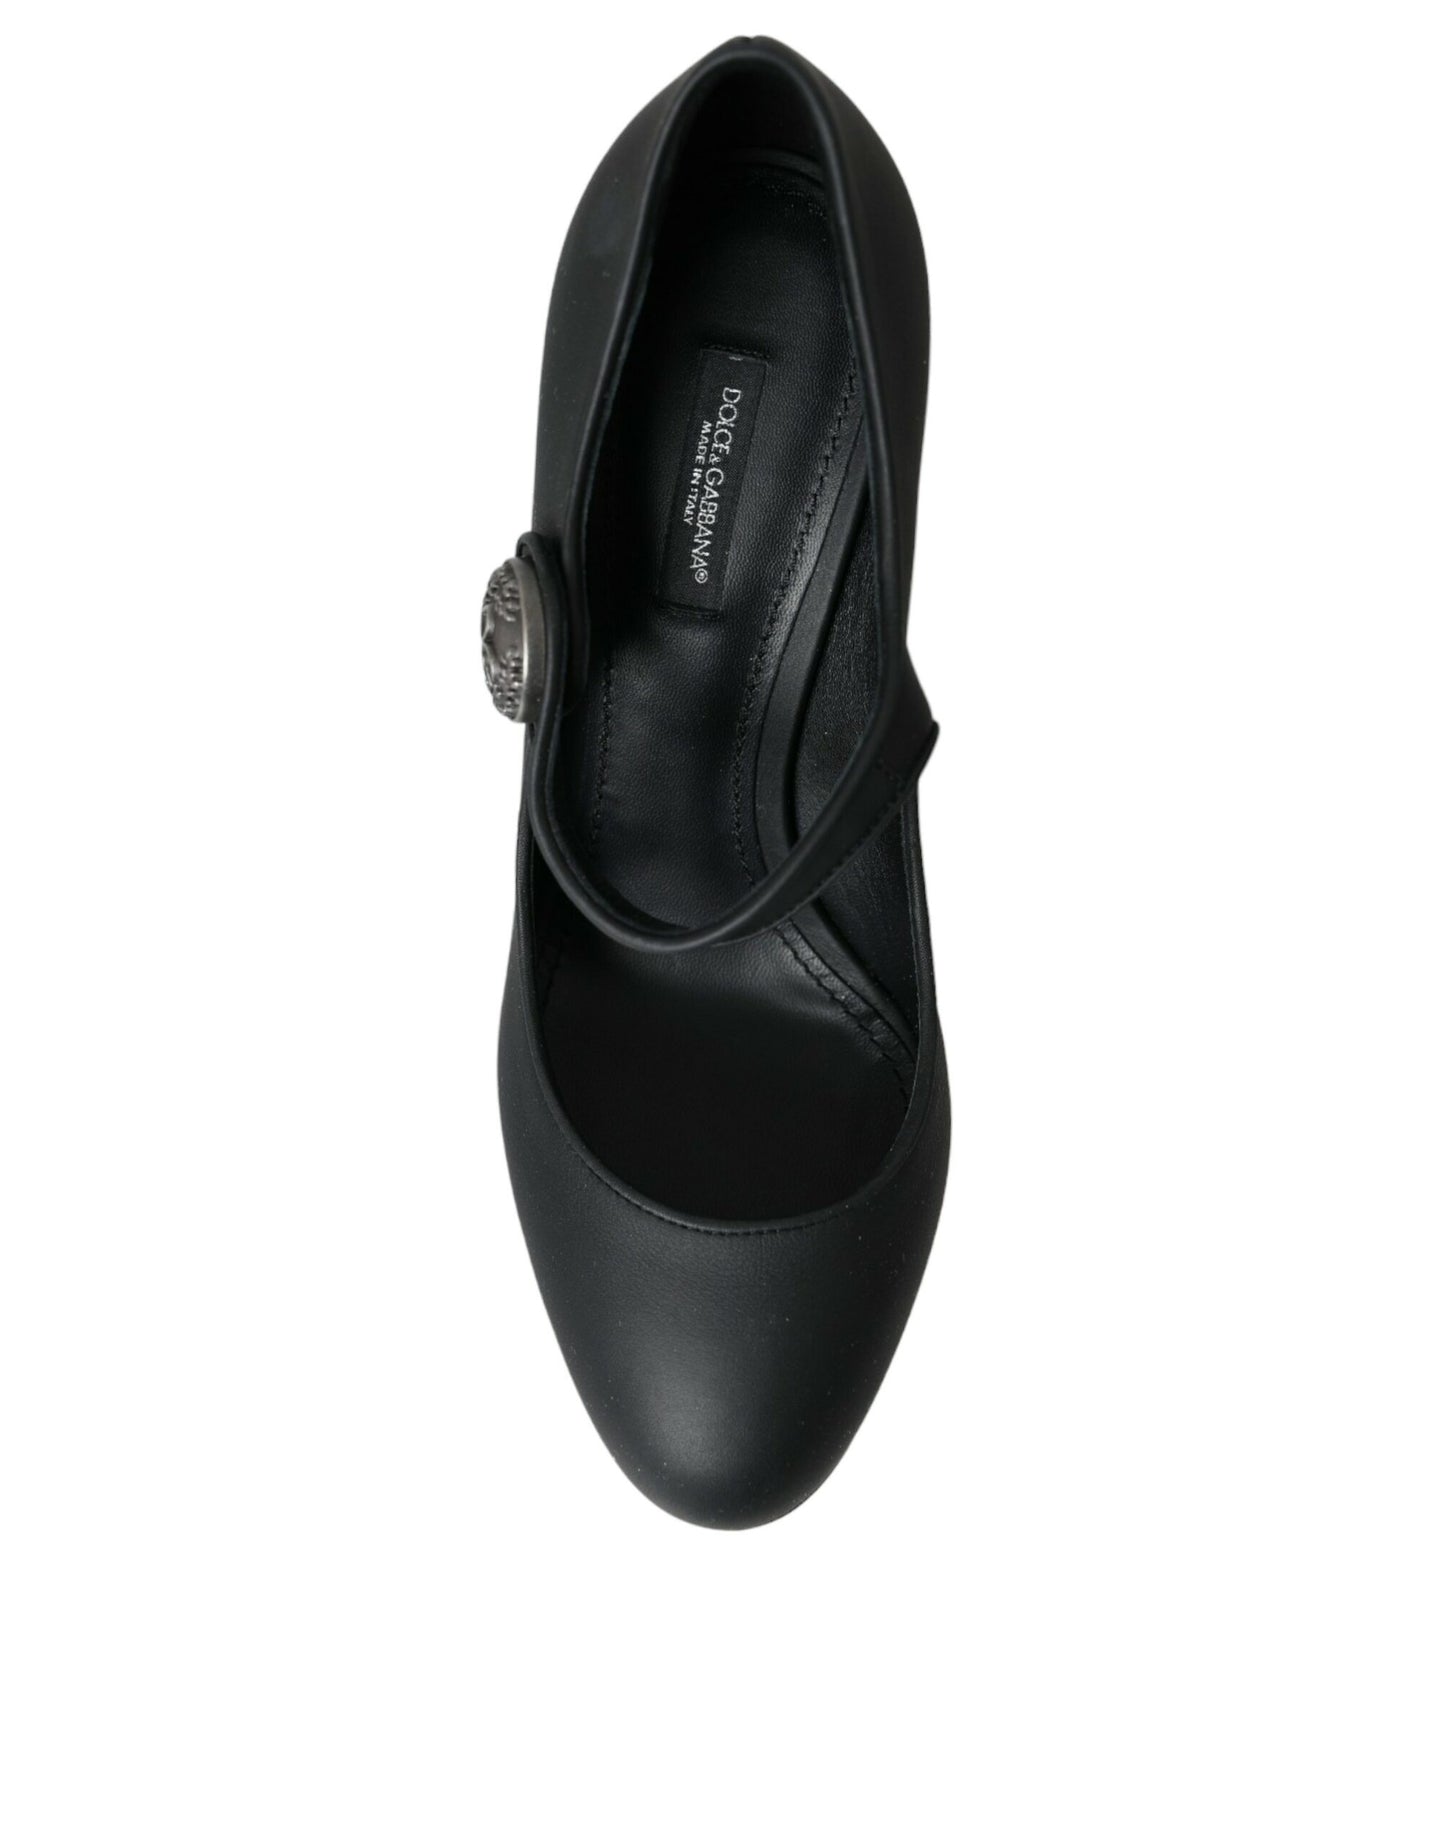 Dolce & Gabbana Black Leather Mary Jane Pumps Heels Shoes